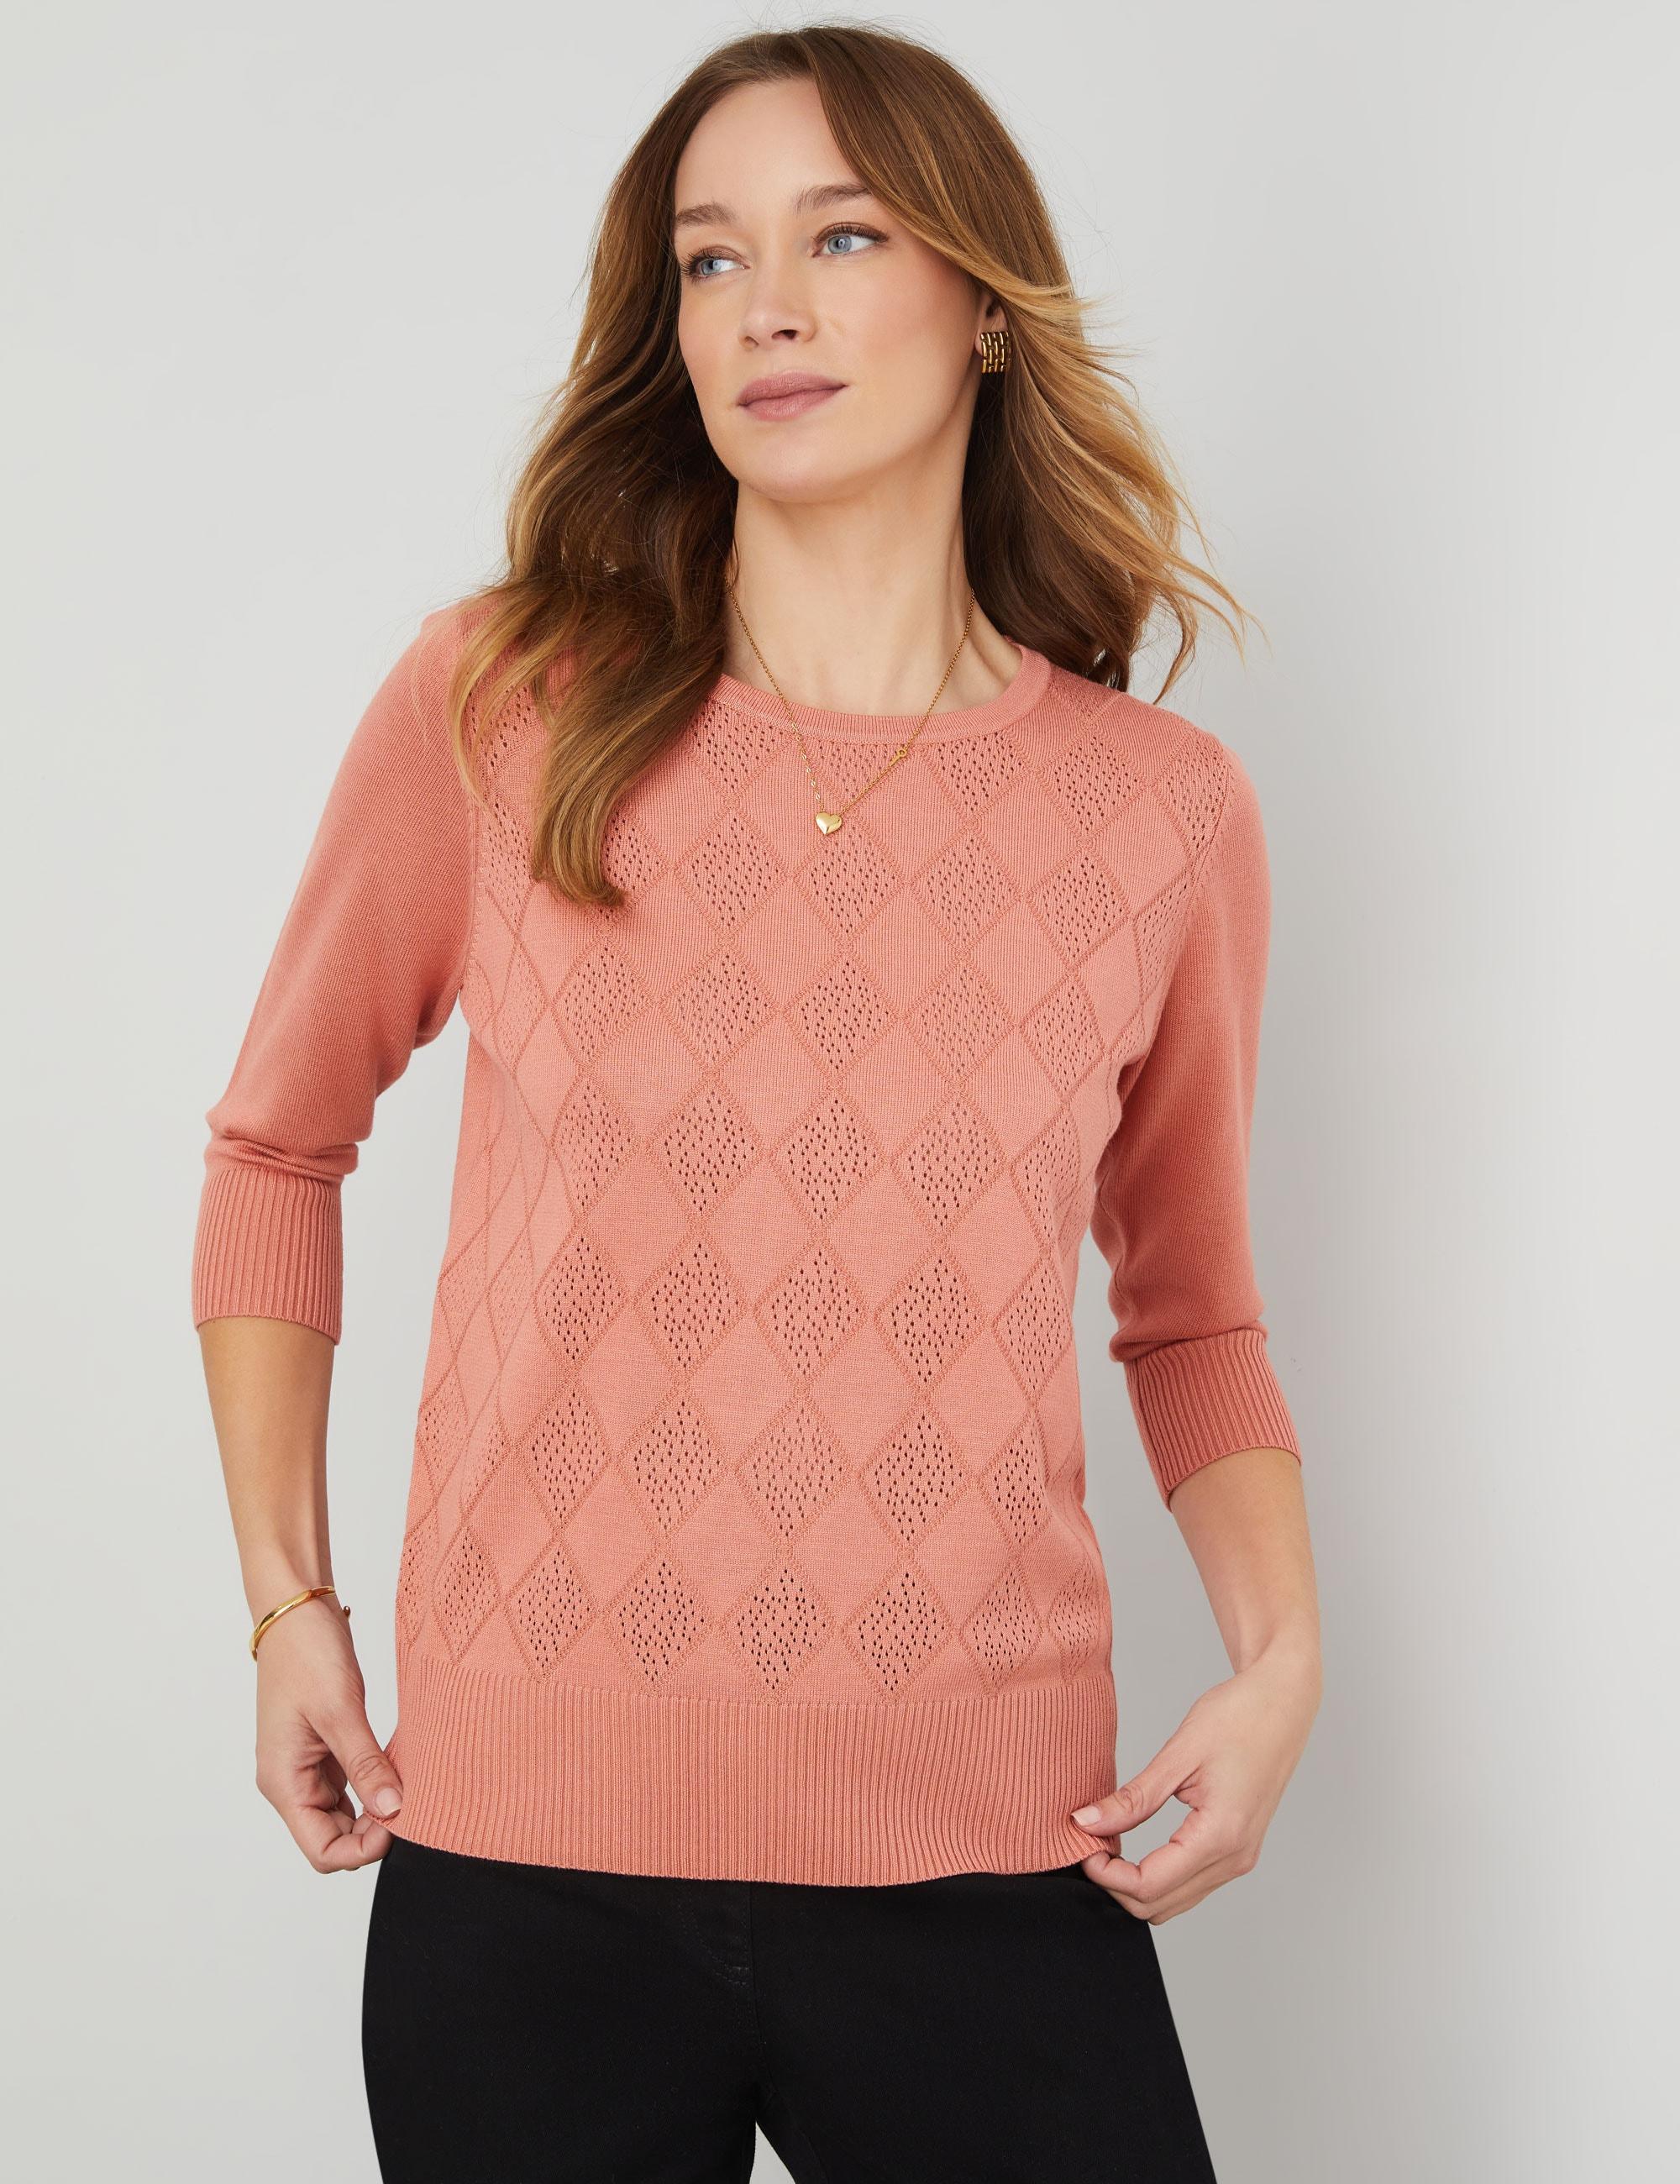 NONI B - Womens Jumper - Regular Winter Sweater - Pink Pullover Texture Diamond - 3/4 Sleeve - Burnt Coral - Crew Neck - Smart Casual Work Clothing